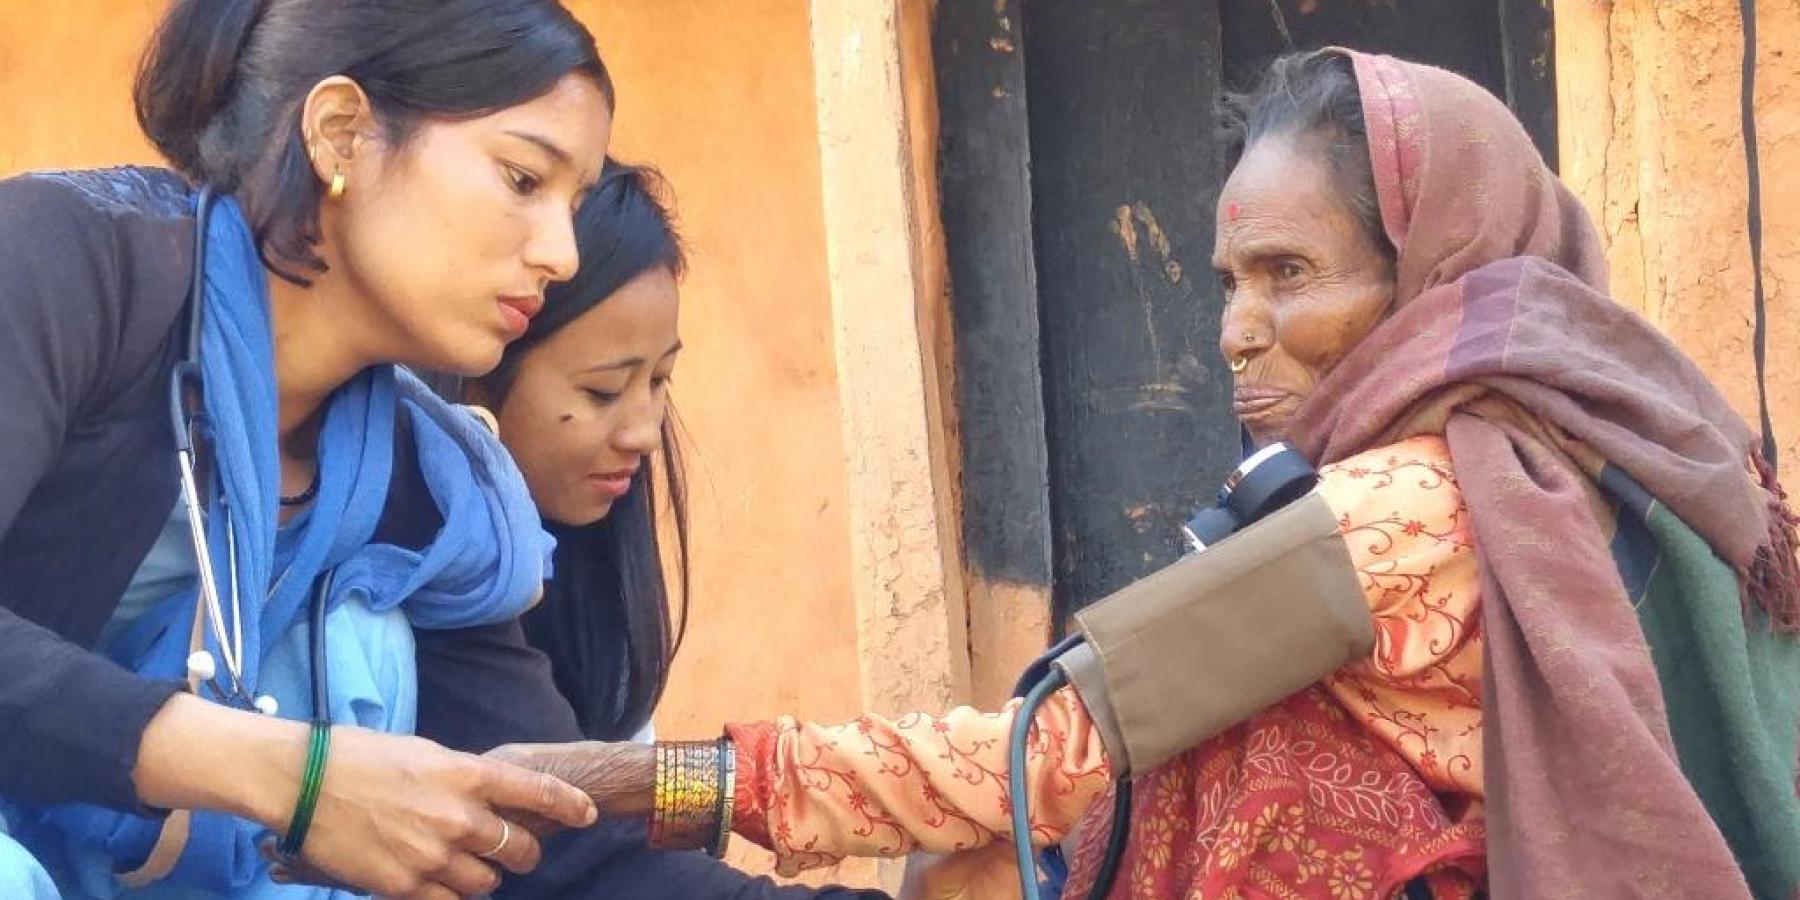 Community health workers check the blood pressure of a woman with breathing difficulties, Achham district, Nepal, Feb 2018